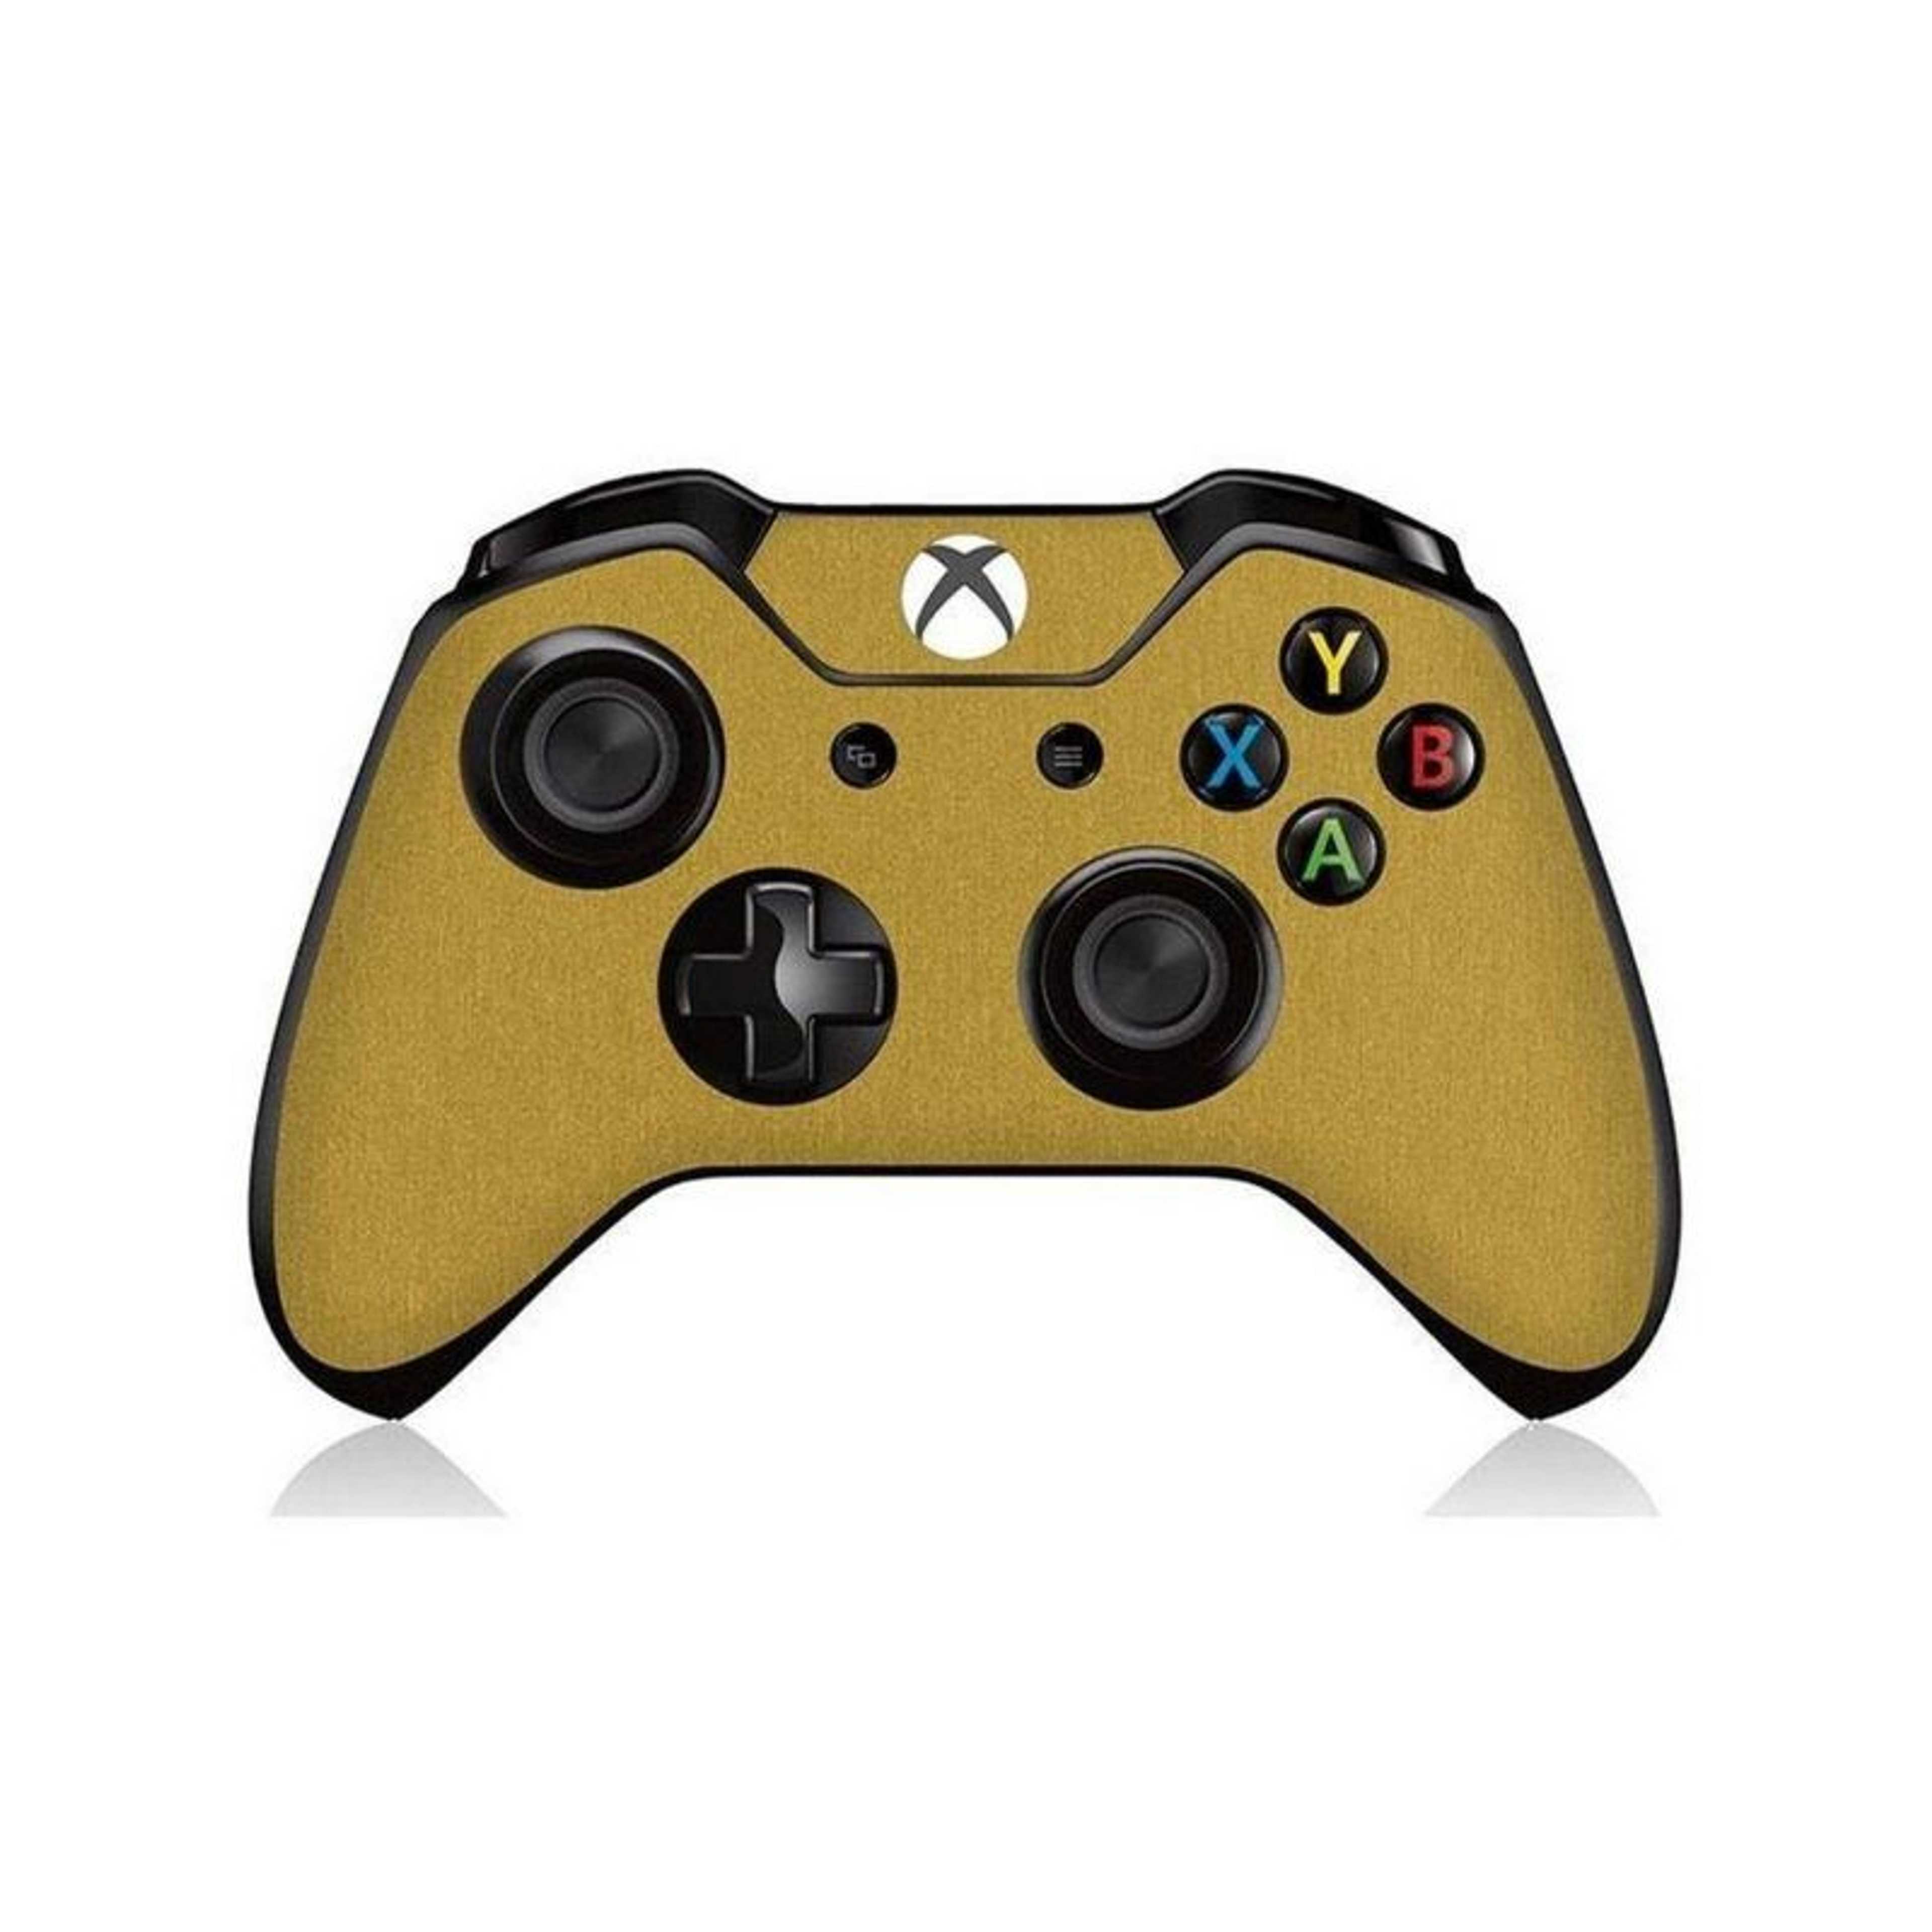 XBOX ONE Controller Golden Brushed Metal Texture Skin